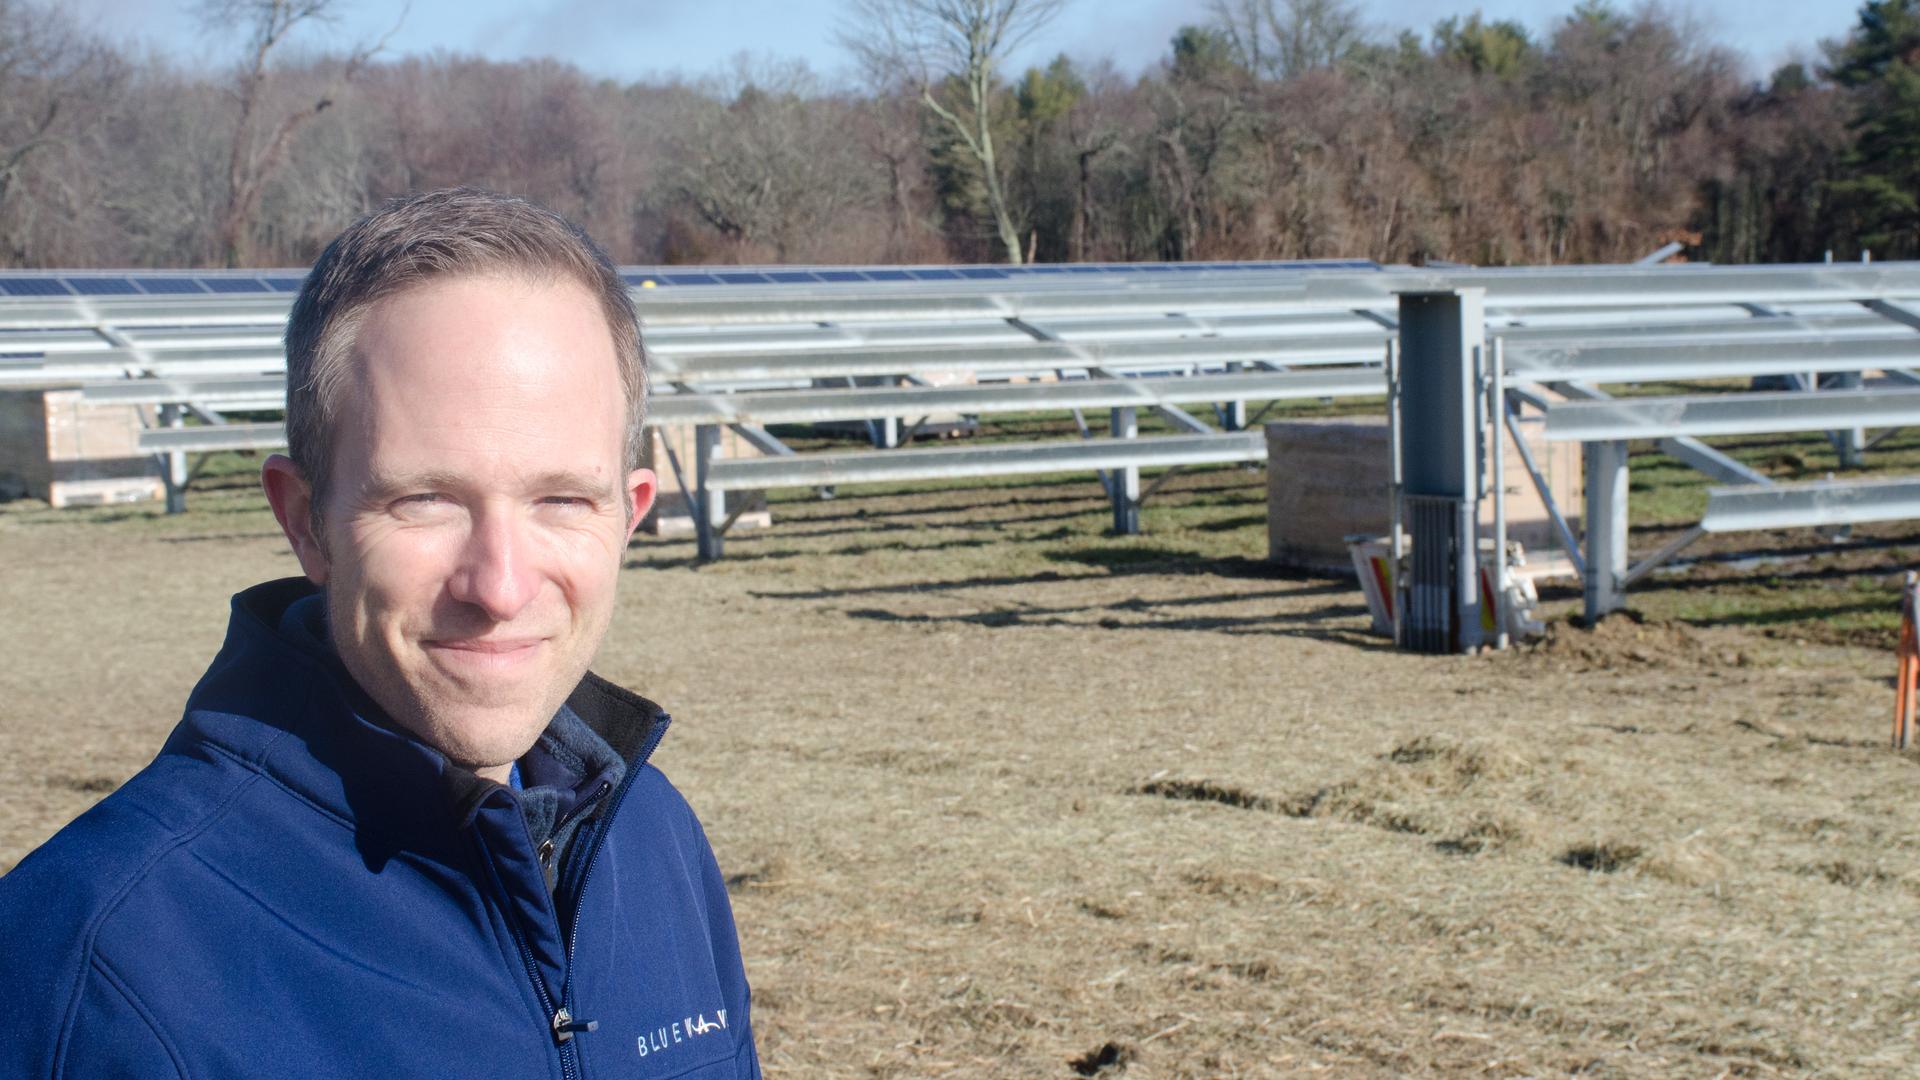 Mark Sylvia with BlueWave Capital. The Boston-based company is building a 1 mw solar farm in Fairhaven, Mass., enough power for roughly 100 customers.